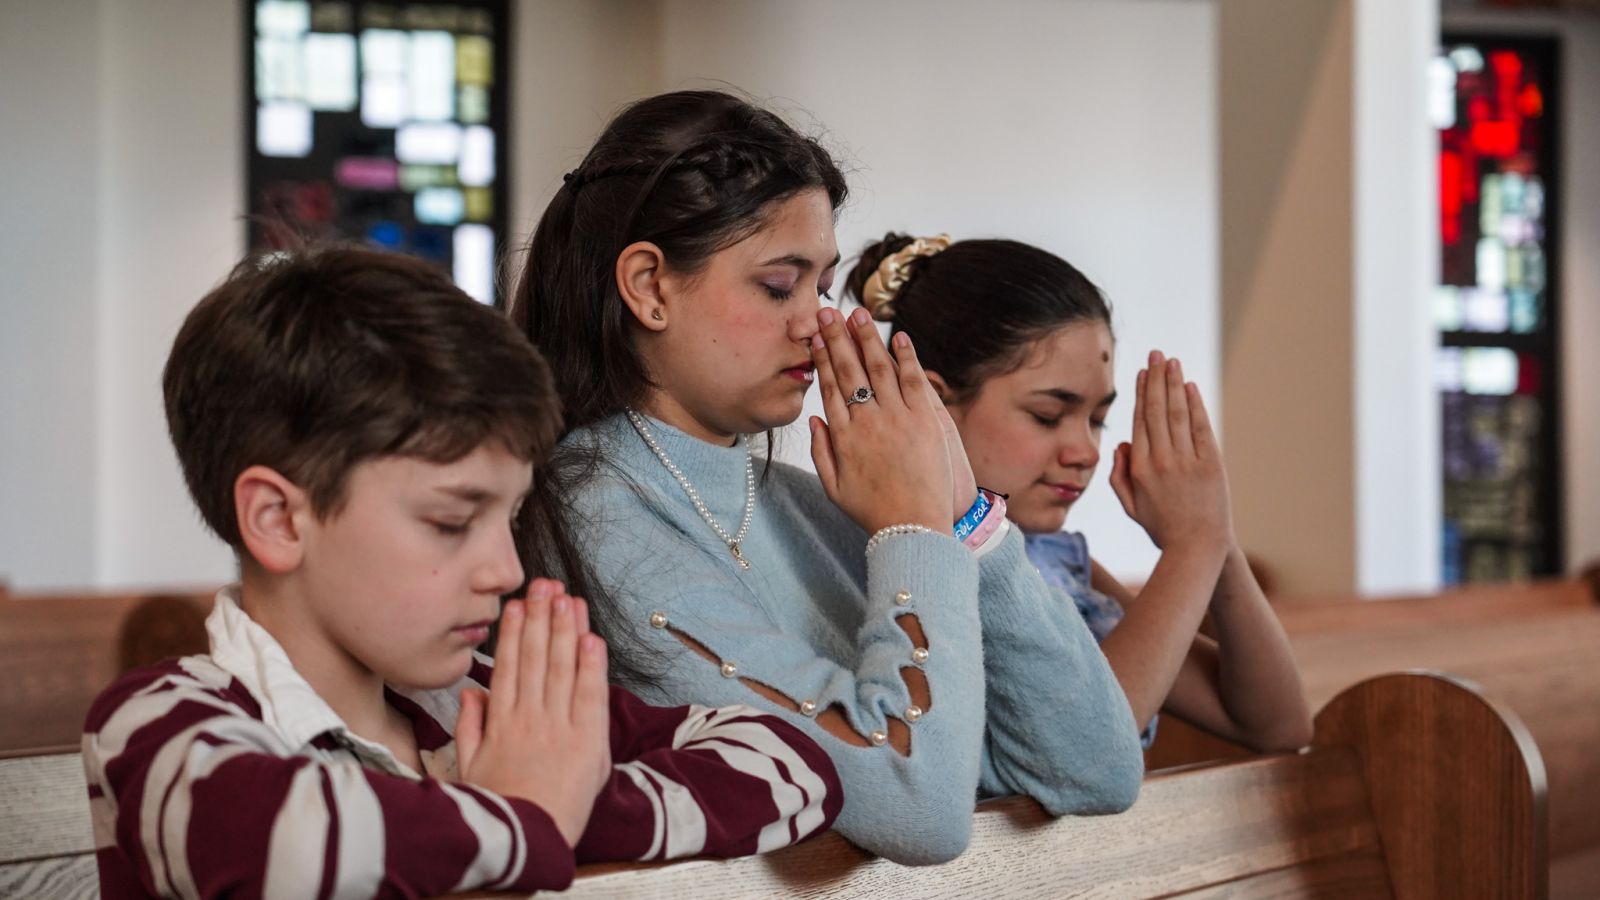 Zoie Garcia, center, prays with younger siblings Kal Garcia, left, and Saylah Garcia in the chapel at St. Elizabeth Ann Seton Catholic Church, Zoie’s “favorite place in the whole world.” The three siblings were received into the Catholic Church at St. Elizabeth Ann Seton in Plano on March 30 during the Easter Vigil Mass. (Amy White/The Texas Catholic)